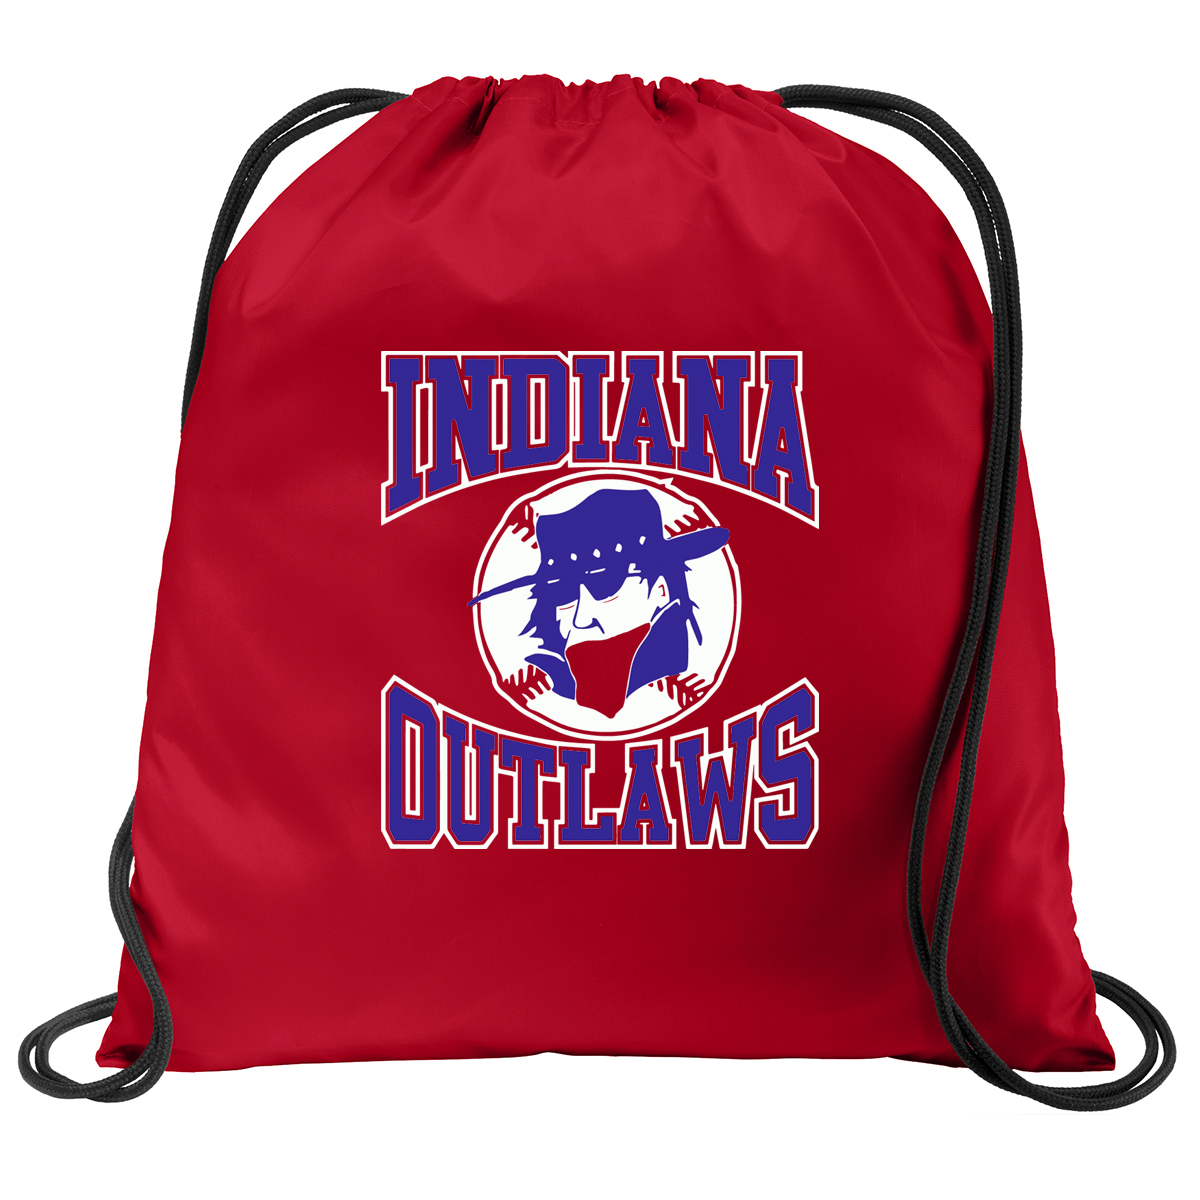 Southern Indiana Outlaws Baseball Cinch Pack